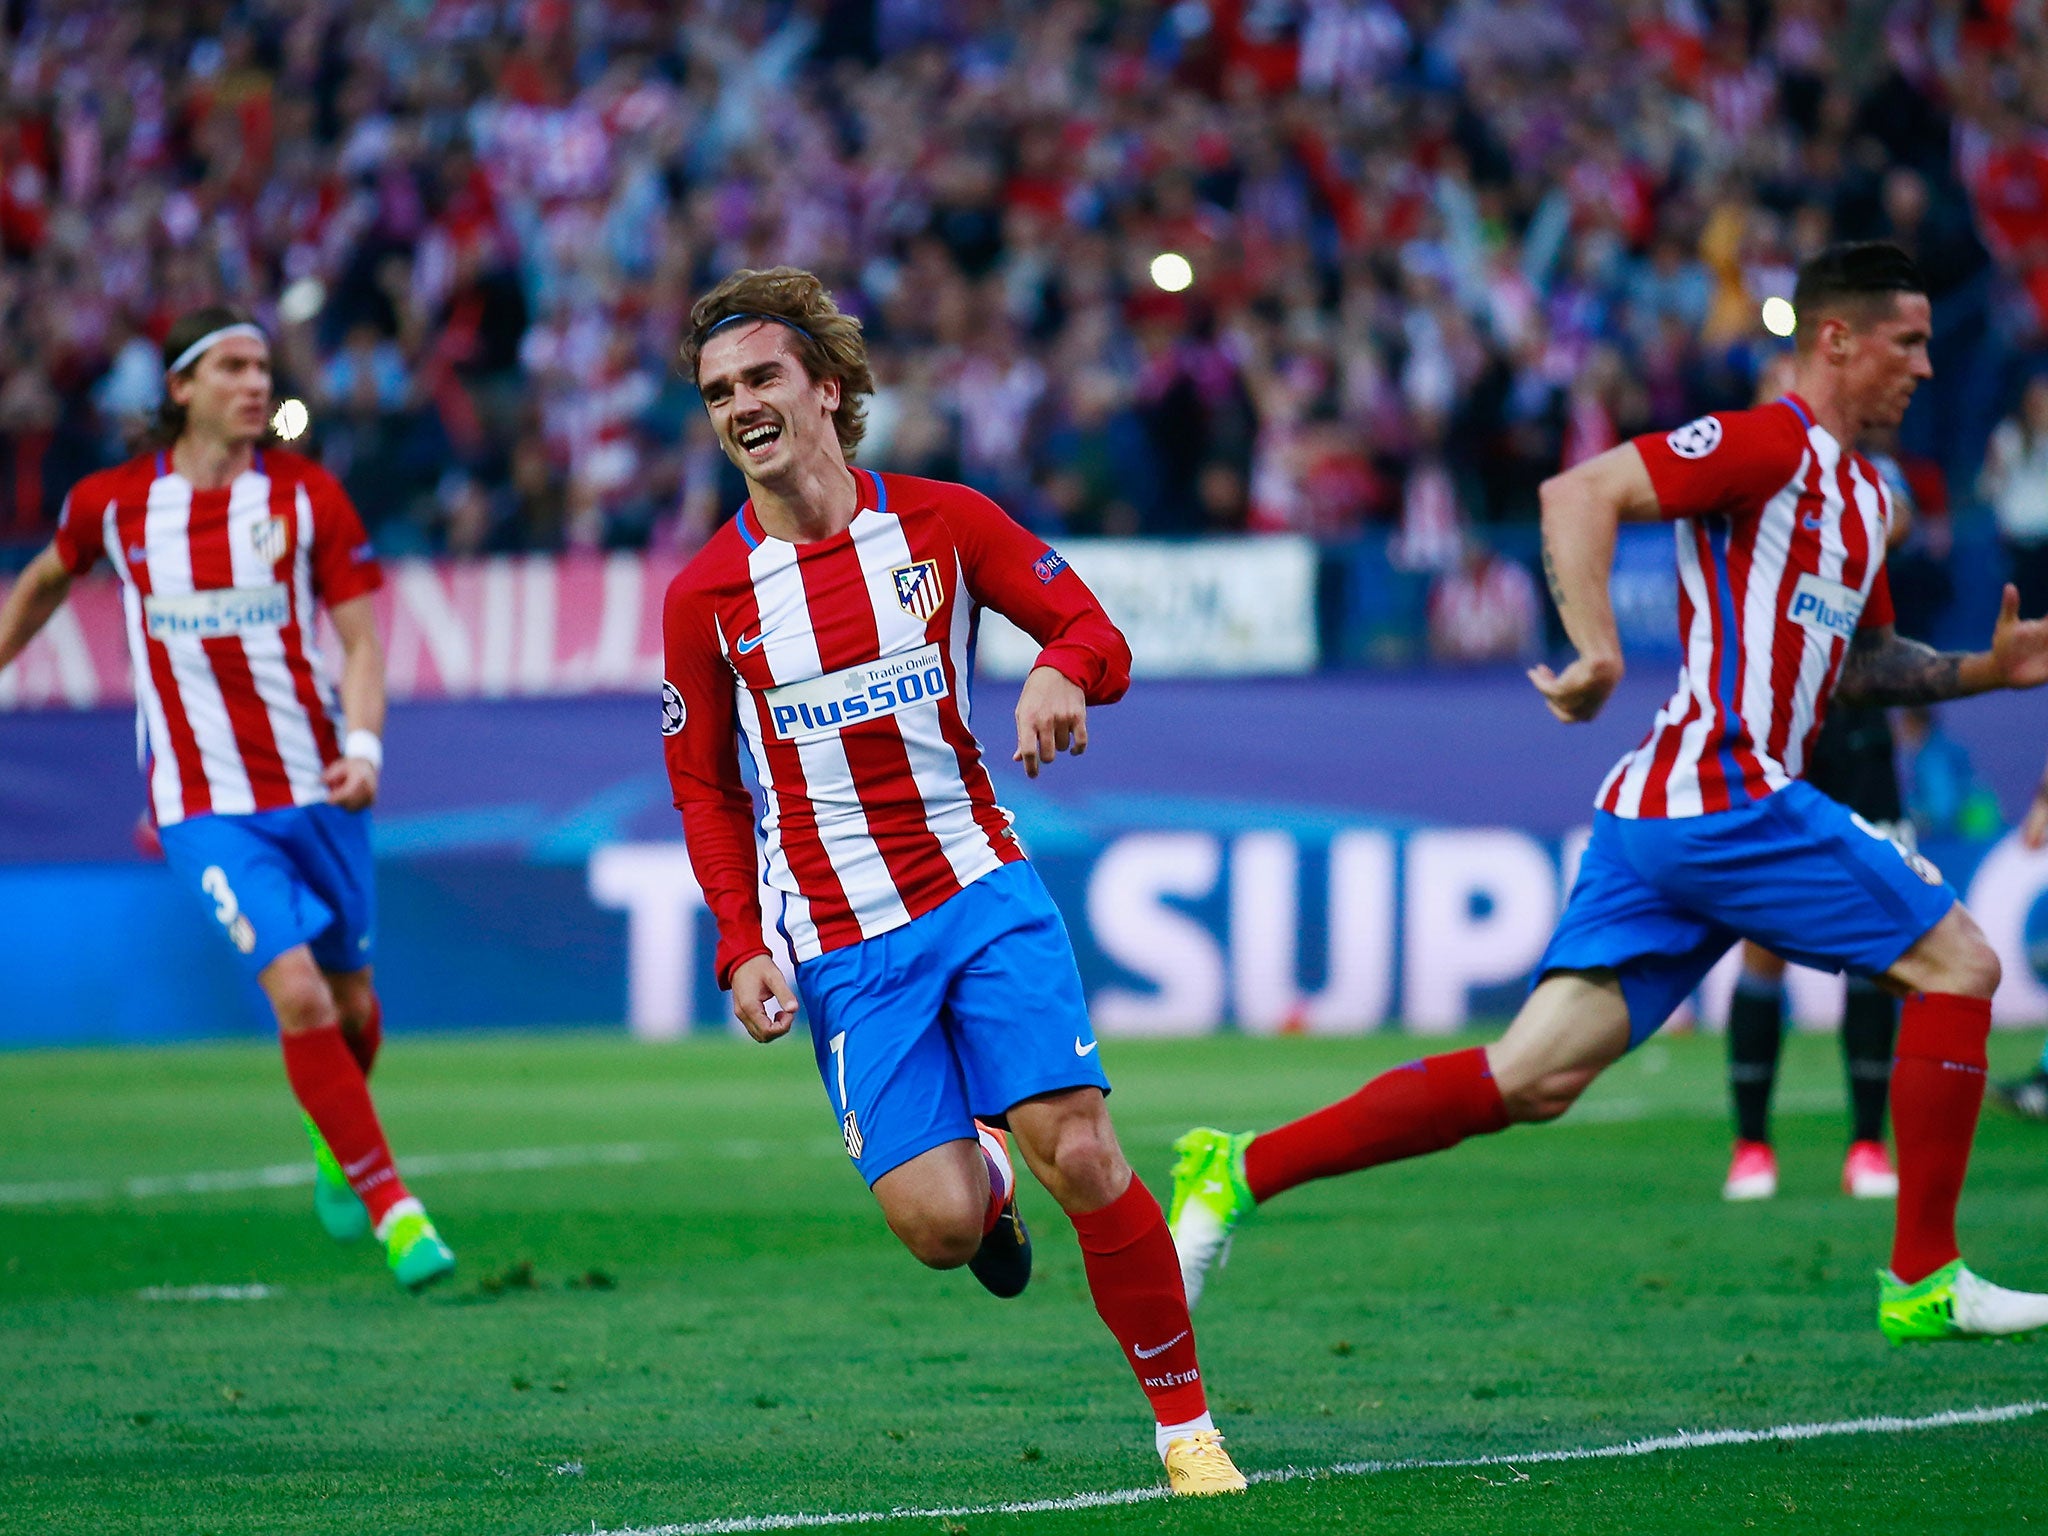 Atletico Madrid are keen to hold on to their star forward